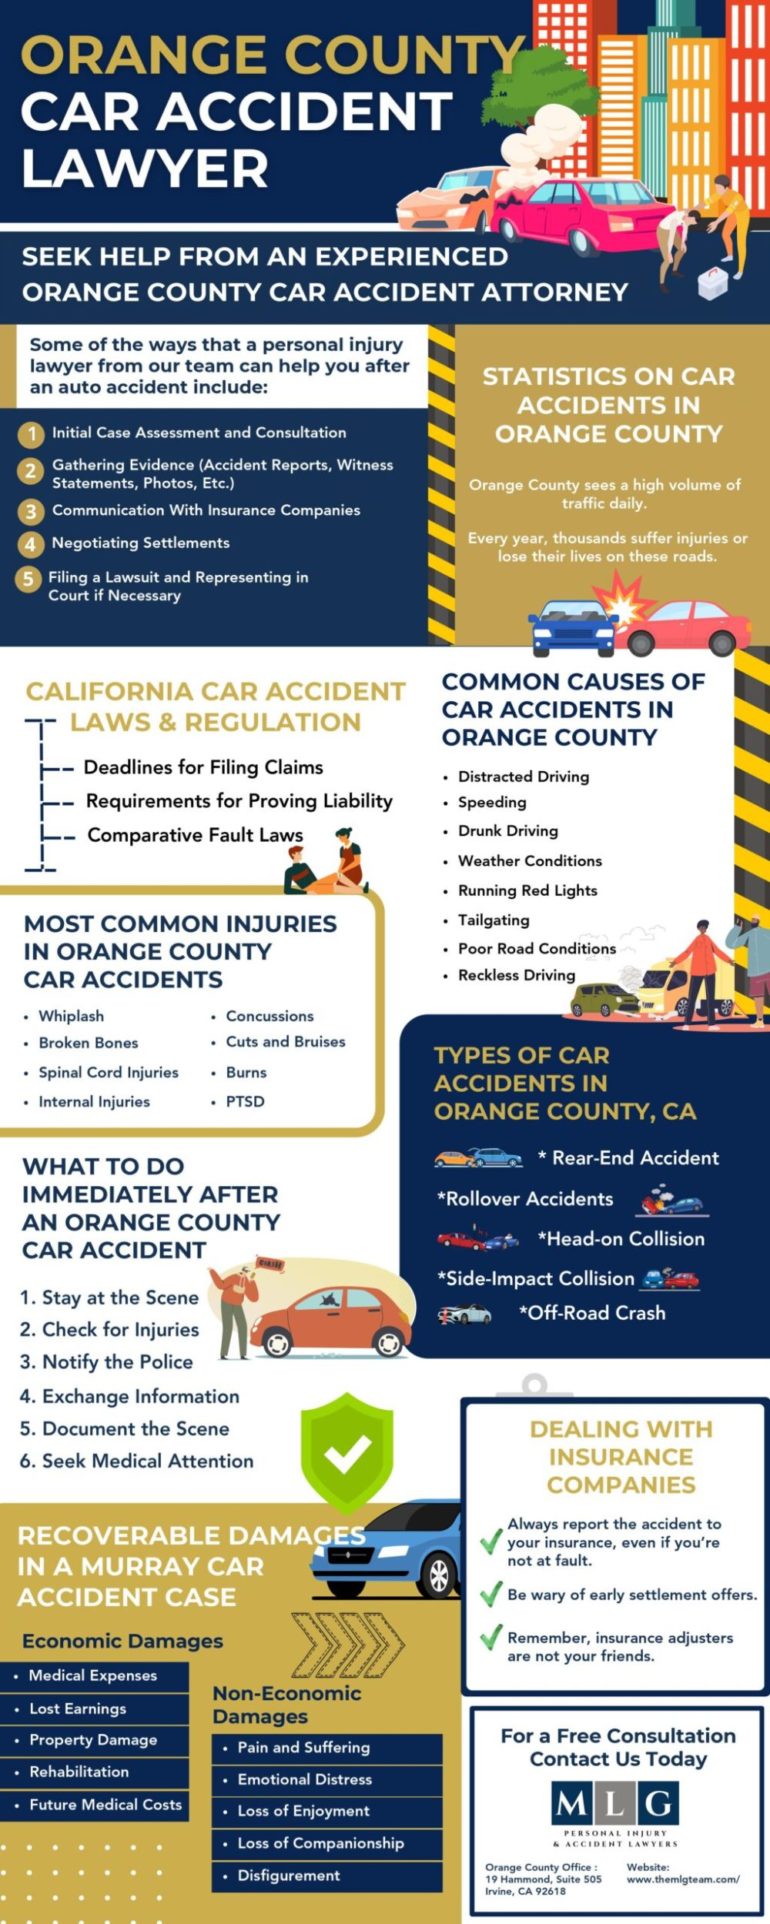 Orange County Car Accident Lawyer [INFOGRAPHIC]